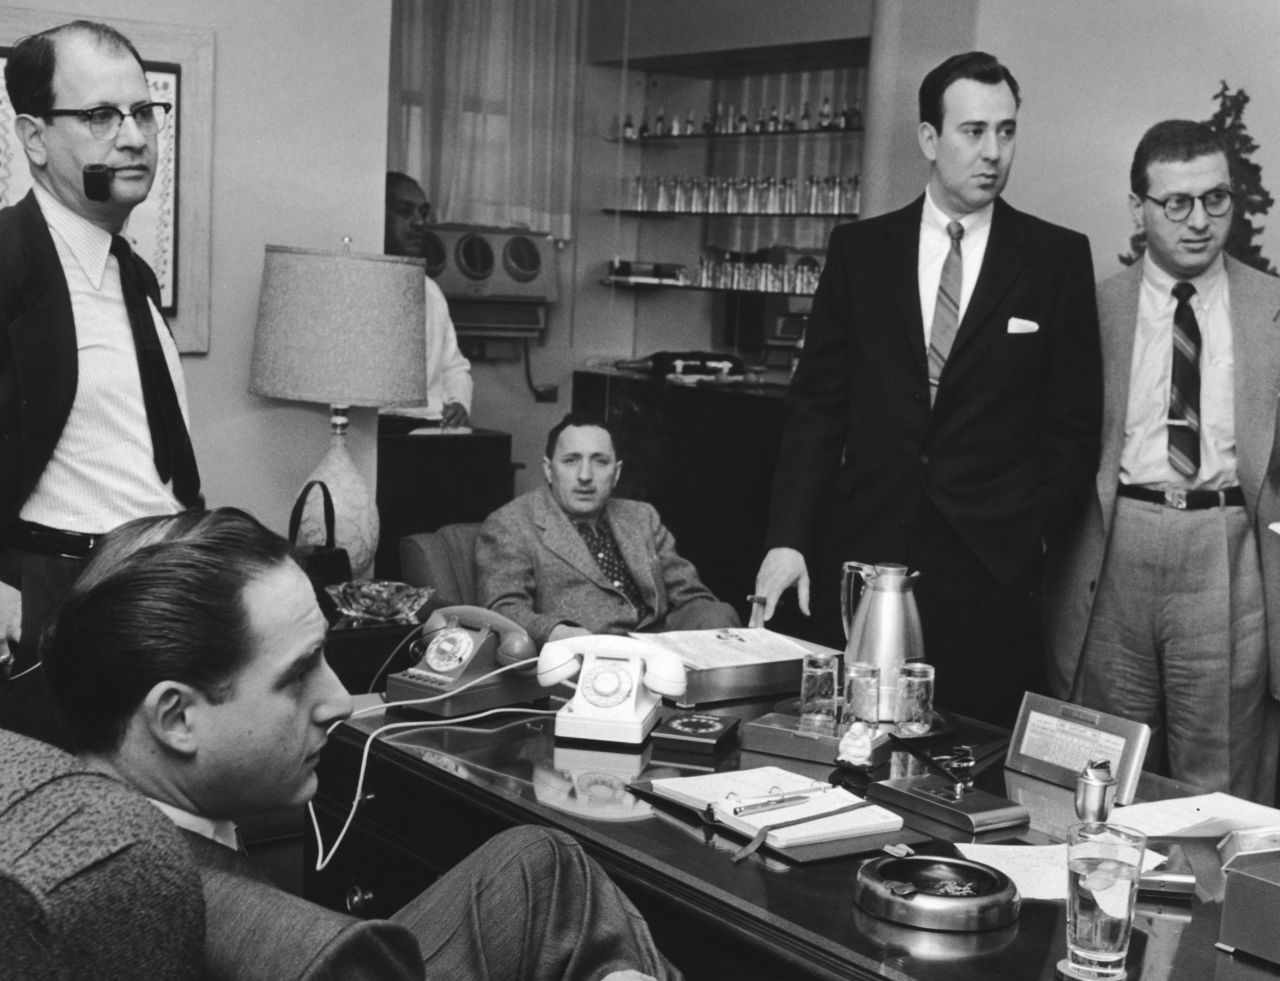 Reiner, second from right, attends a writers' meeting for "Your Show of Shows," circa 1952. Seated on the left is another of the show's stars, Sid Caesar. The show ran from 1950-54.